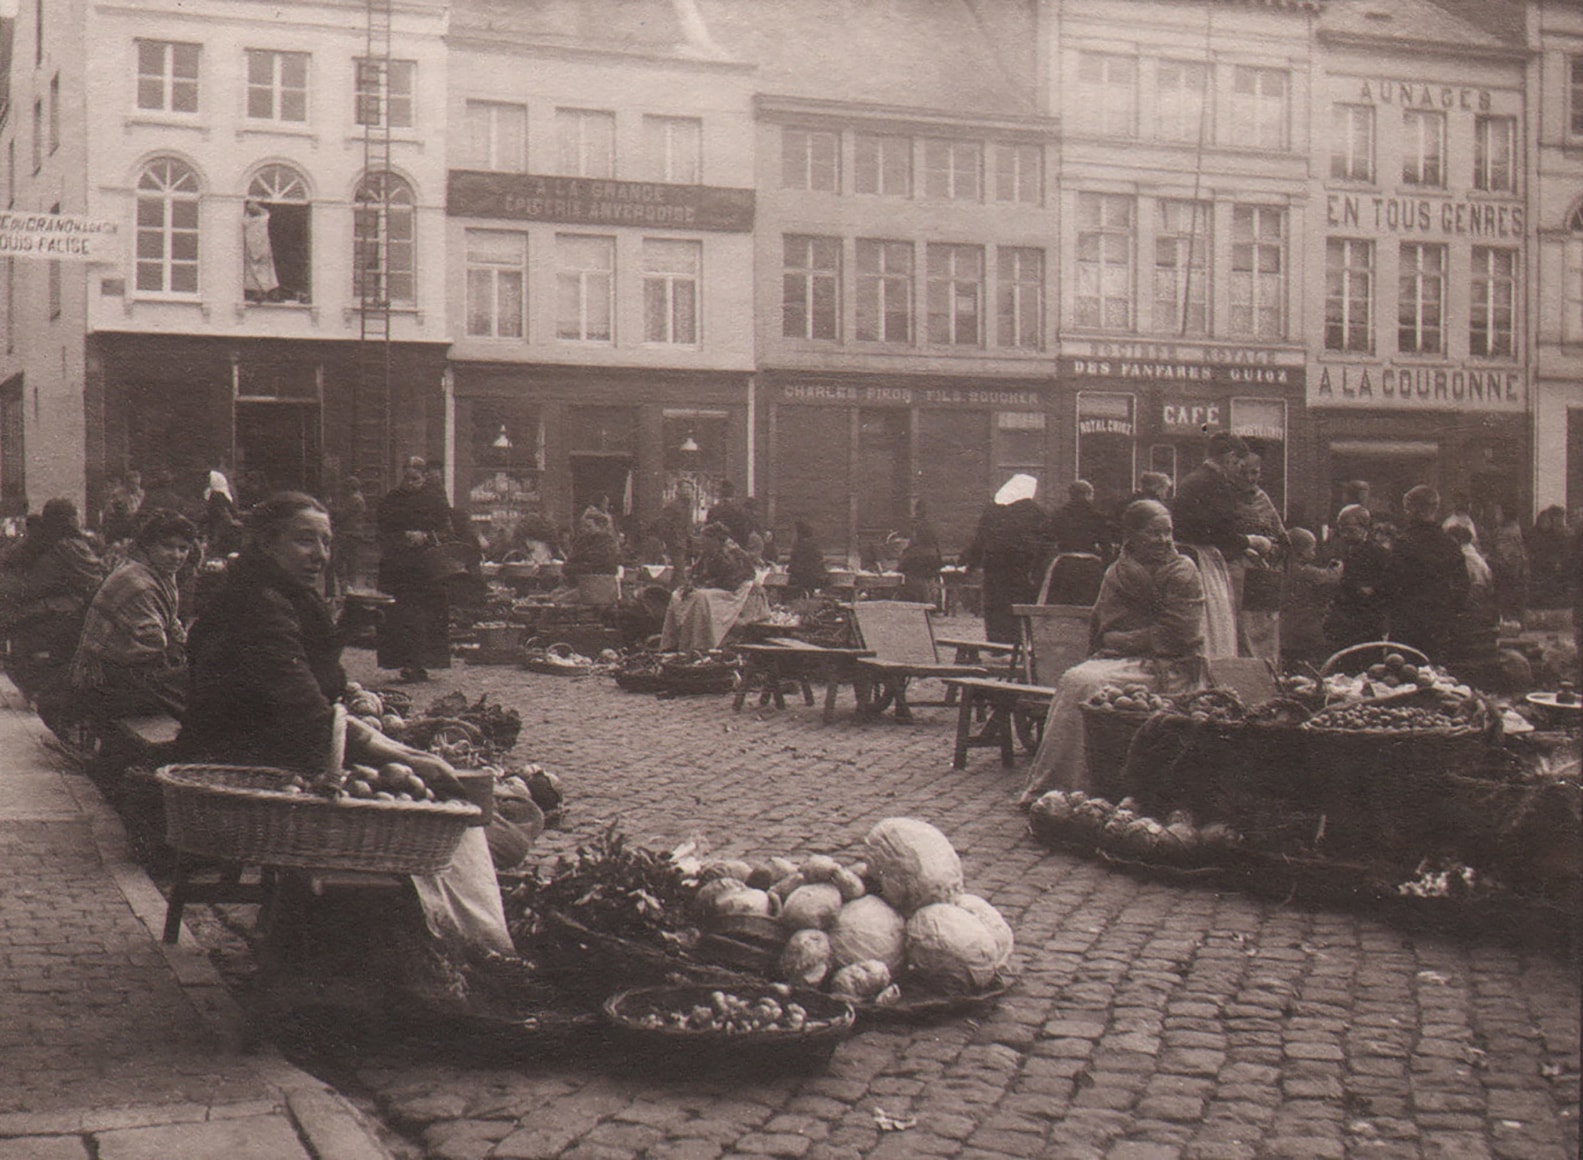 23. L&eacute;onard Misonne, Untitled, c. 1930. Market vendors on a cobbled commercial street with various forms of produce. Sepia-toned print.